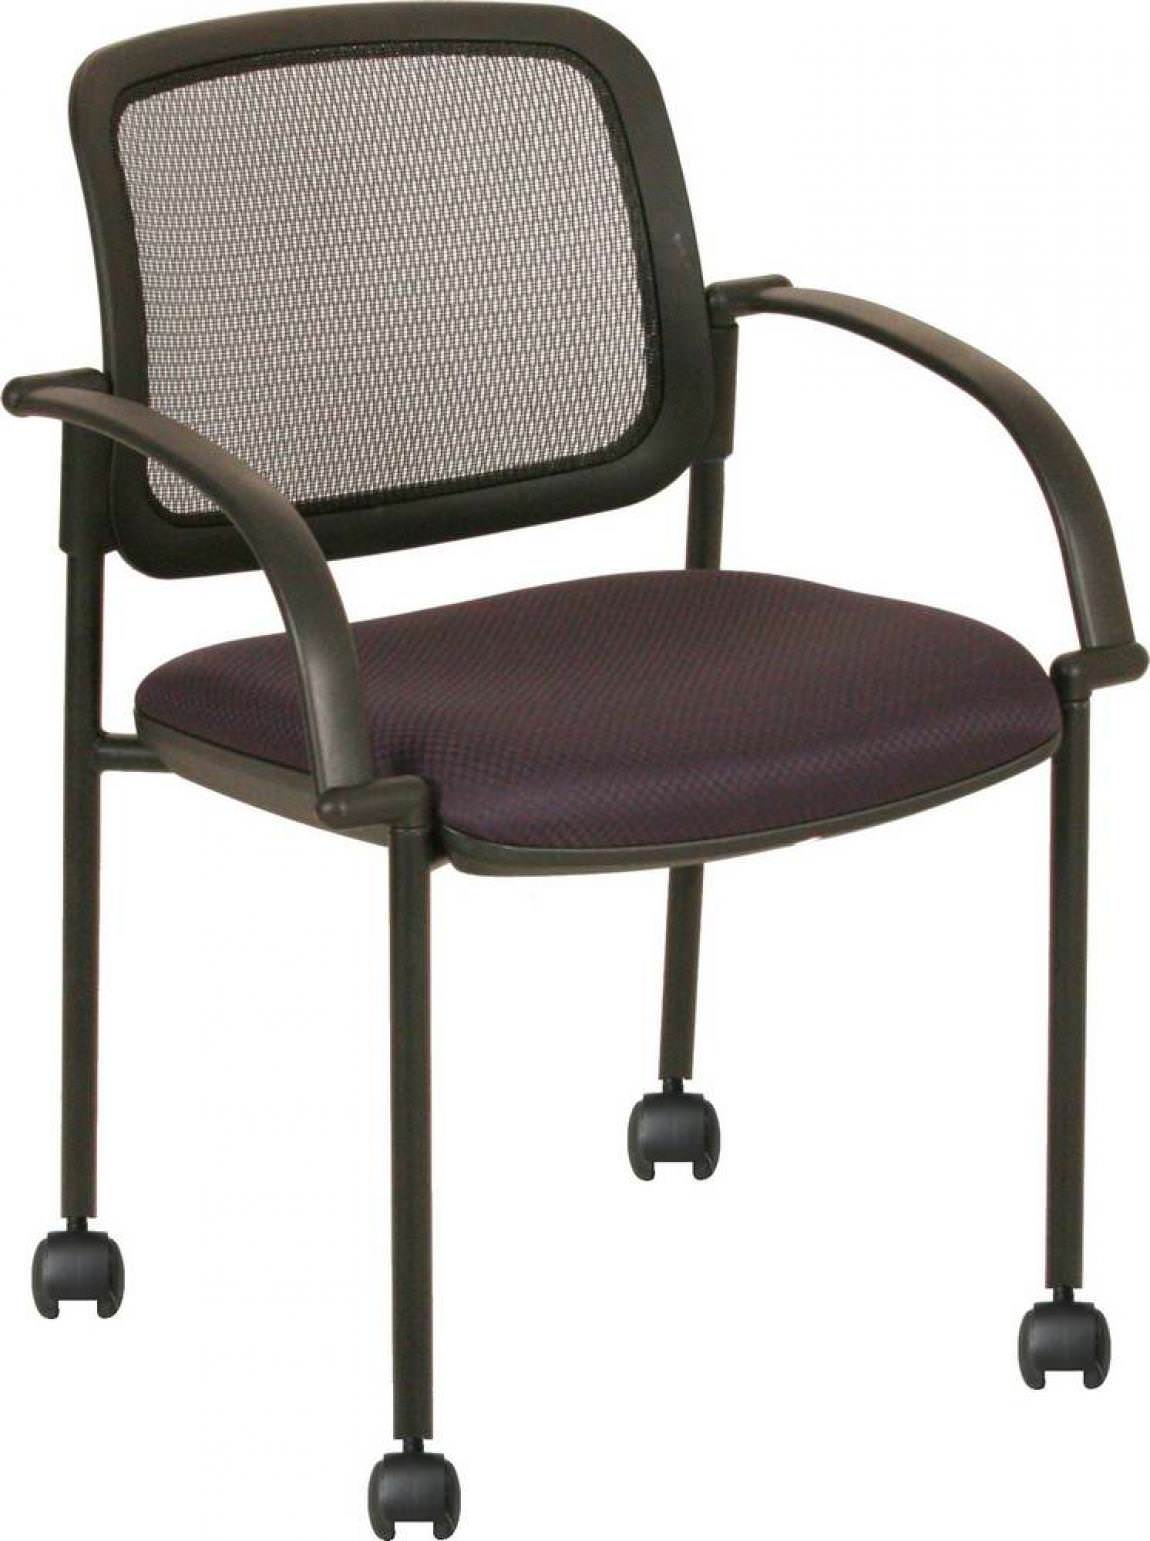 Rolling Discount Guest Chair